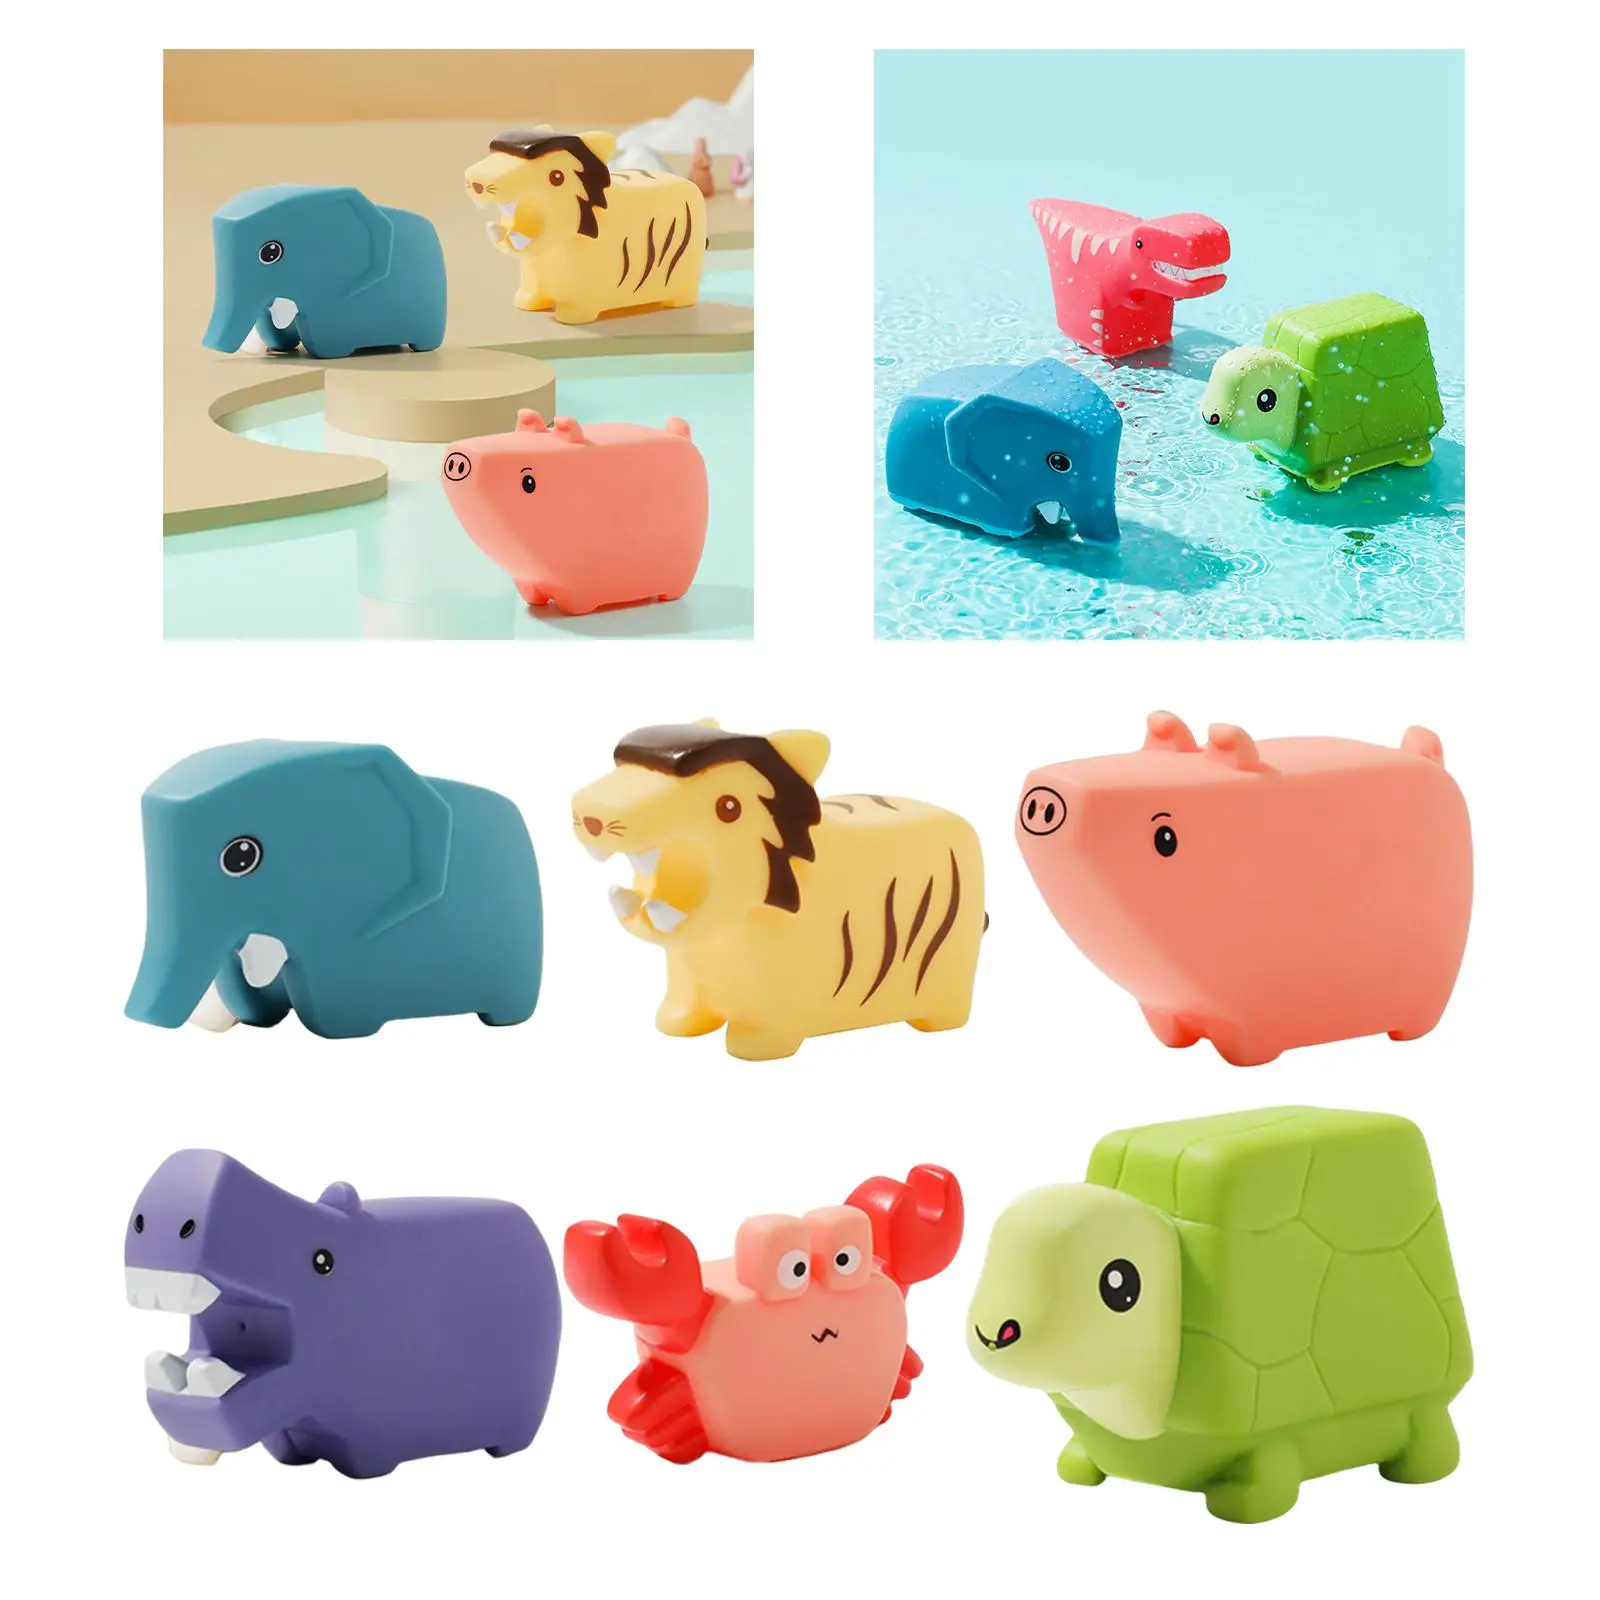 3 Pieces Little Animal Squirts Fun Bath Toys Funny Gift Kids Wash Swimming Water Cute Animals Bath Toy for Baby